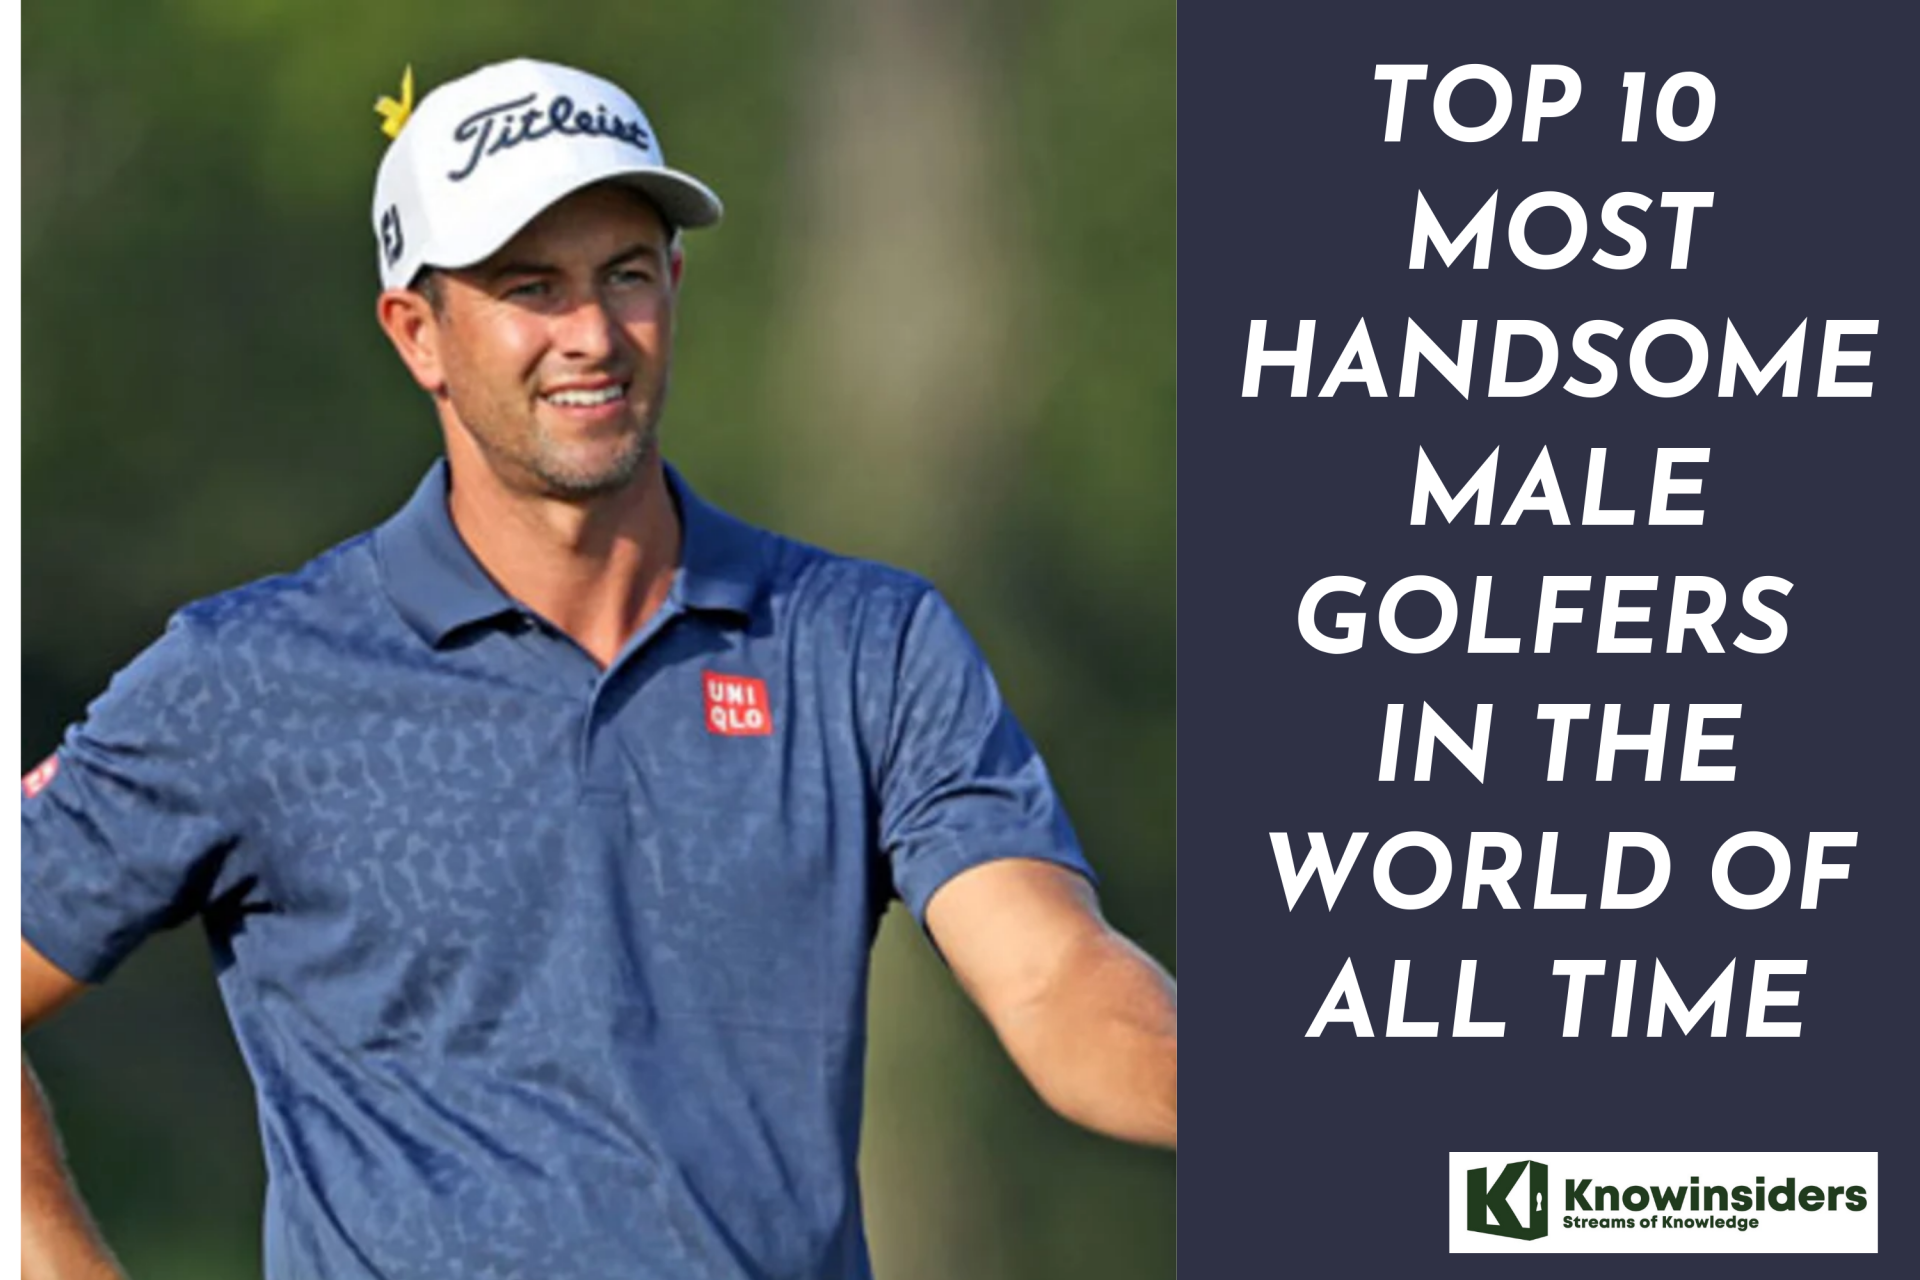 Top 10 Most Handsome Male Golfers in the World of All Time